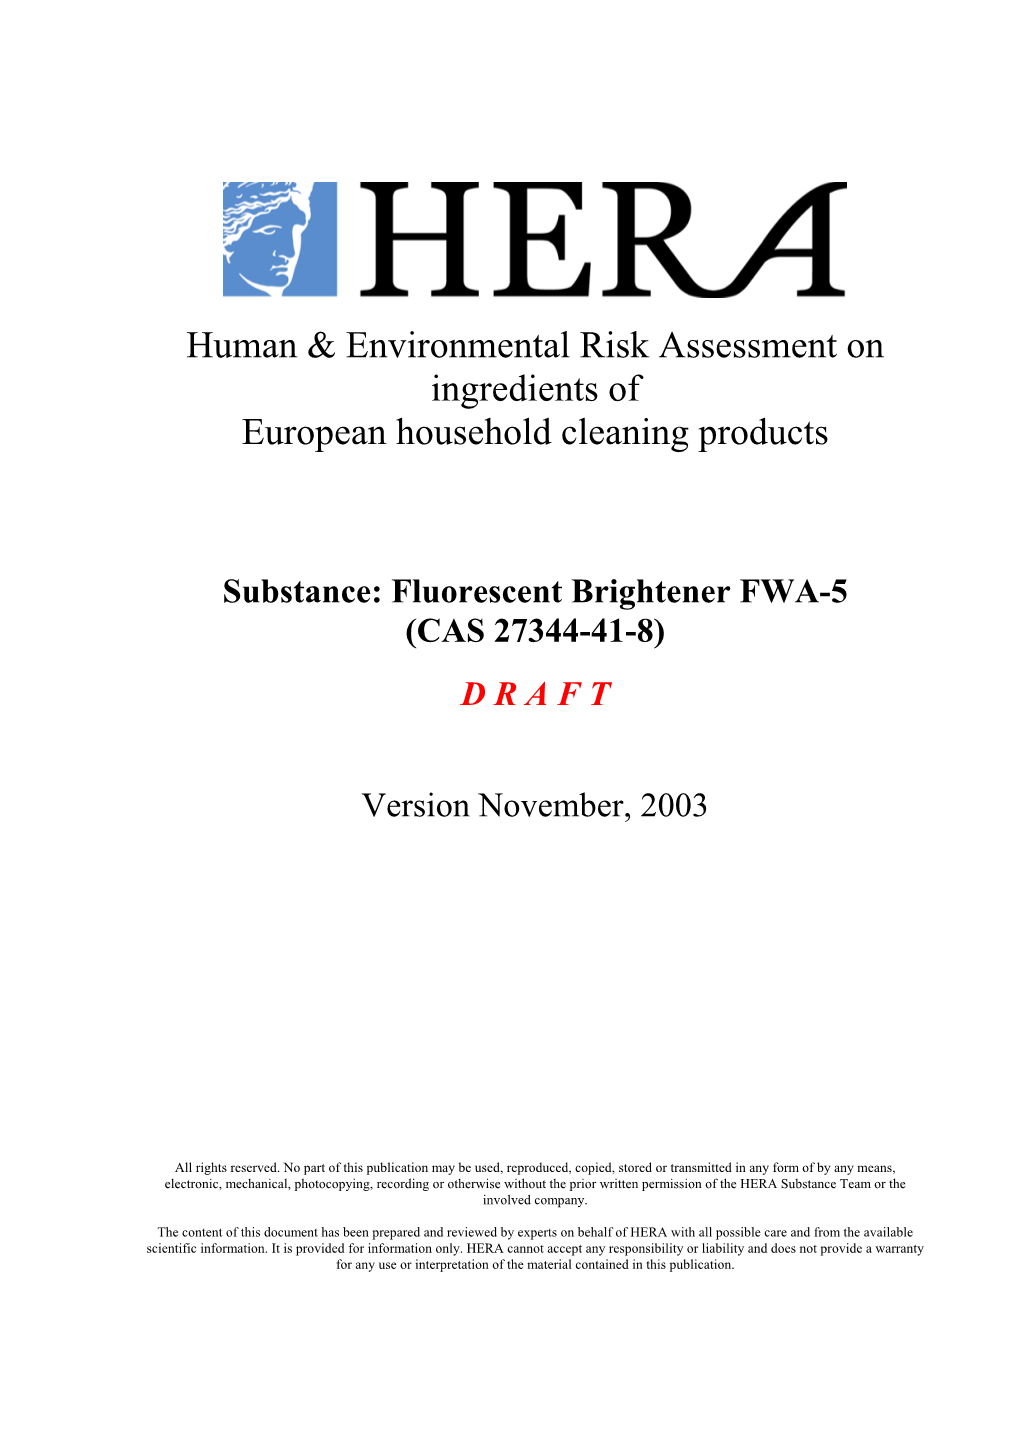 Instruction to Authors of HERA Risk Assessments